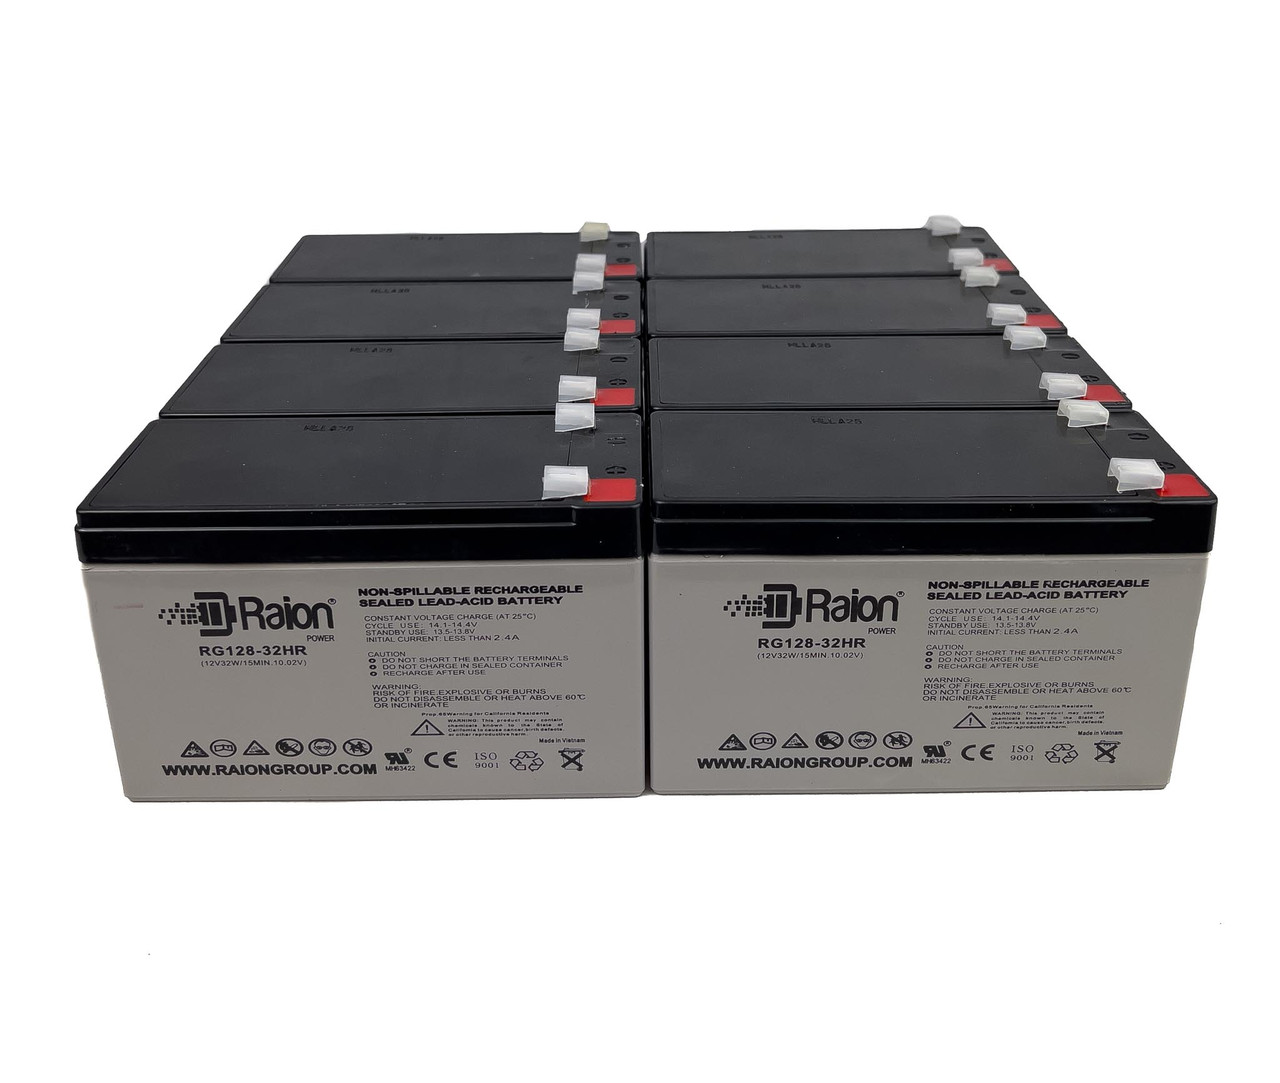 Raion Power 12V 7.5Ah High Rate Discharge UPS Batteries for Toshiba UF1A1A020C6RK - 8 Pack